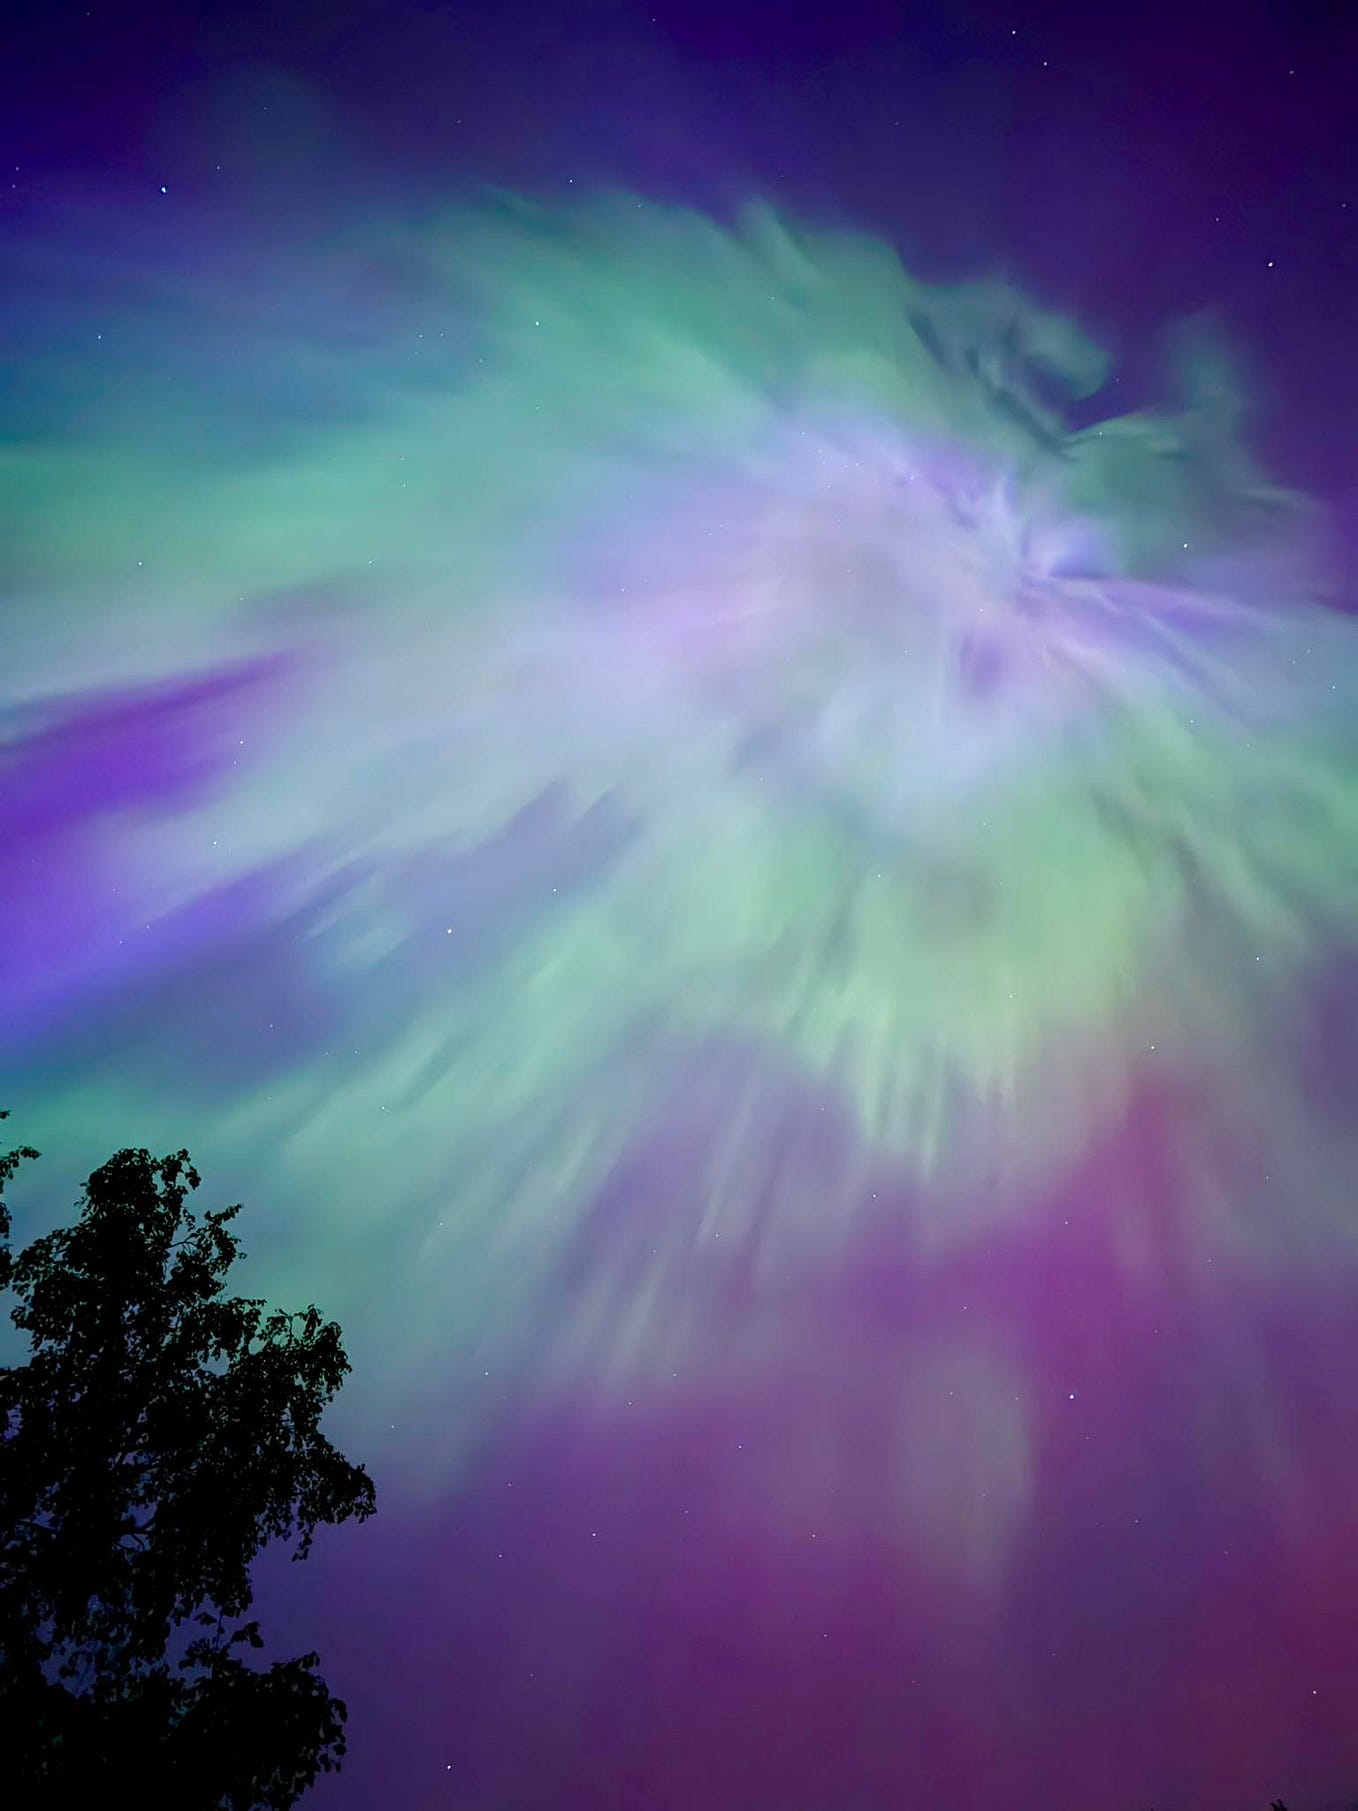 The unexpected connection between the northern lights and Hubble’s death